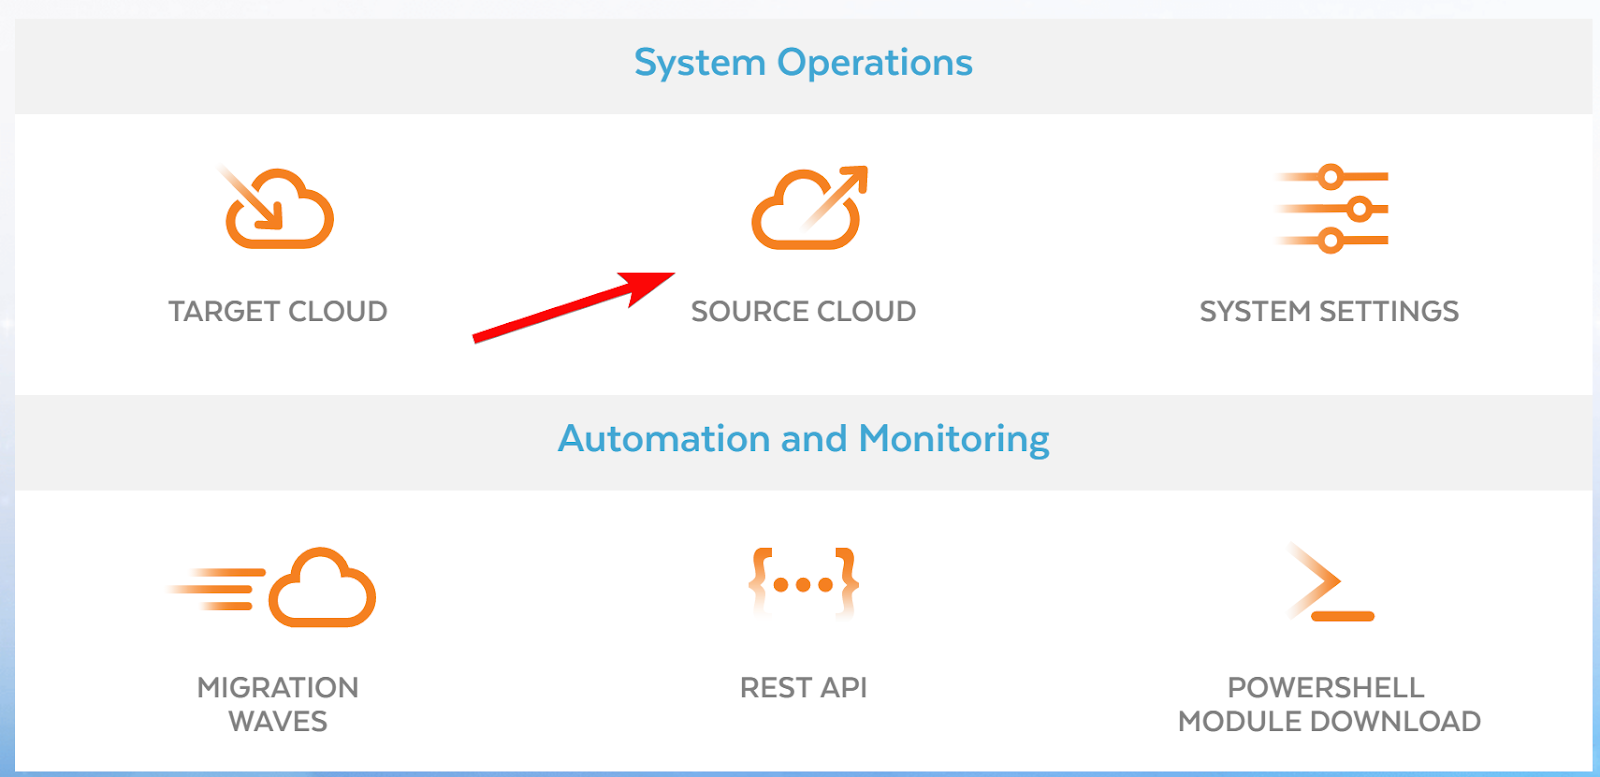 The Source Cloud icon highlighted